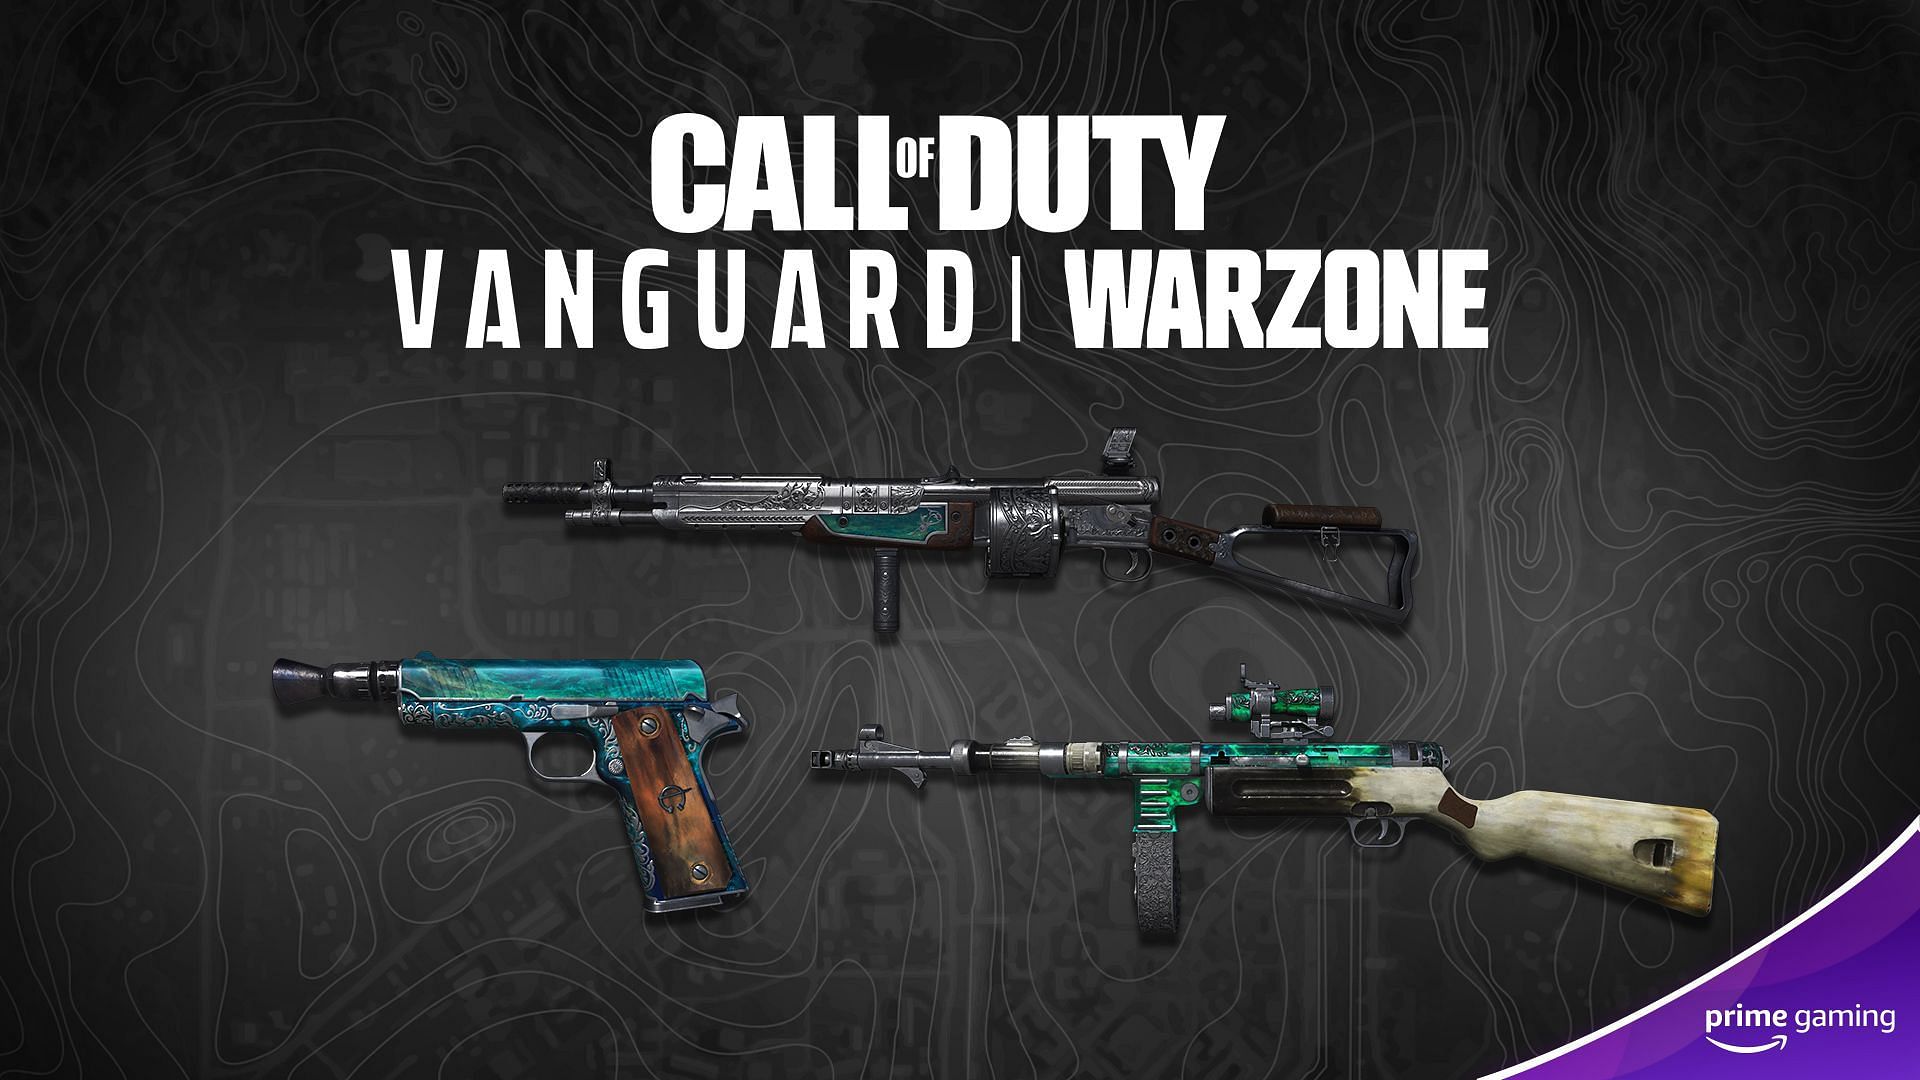 Call of Duty Warzone and Vanguard How to claim the latest Prime Gaming